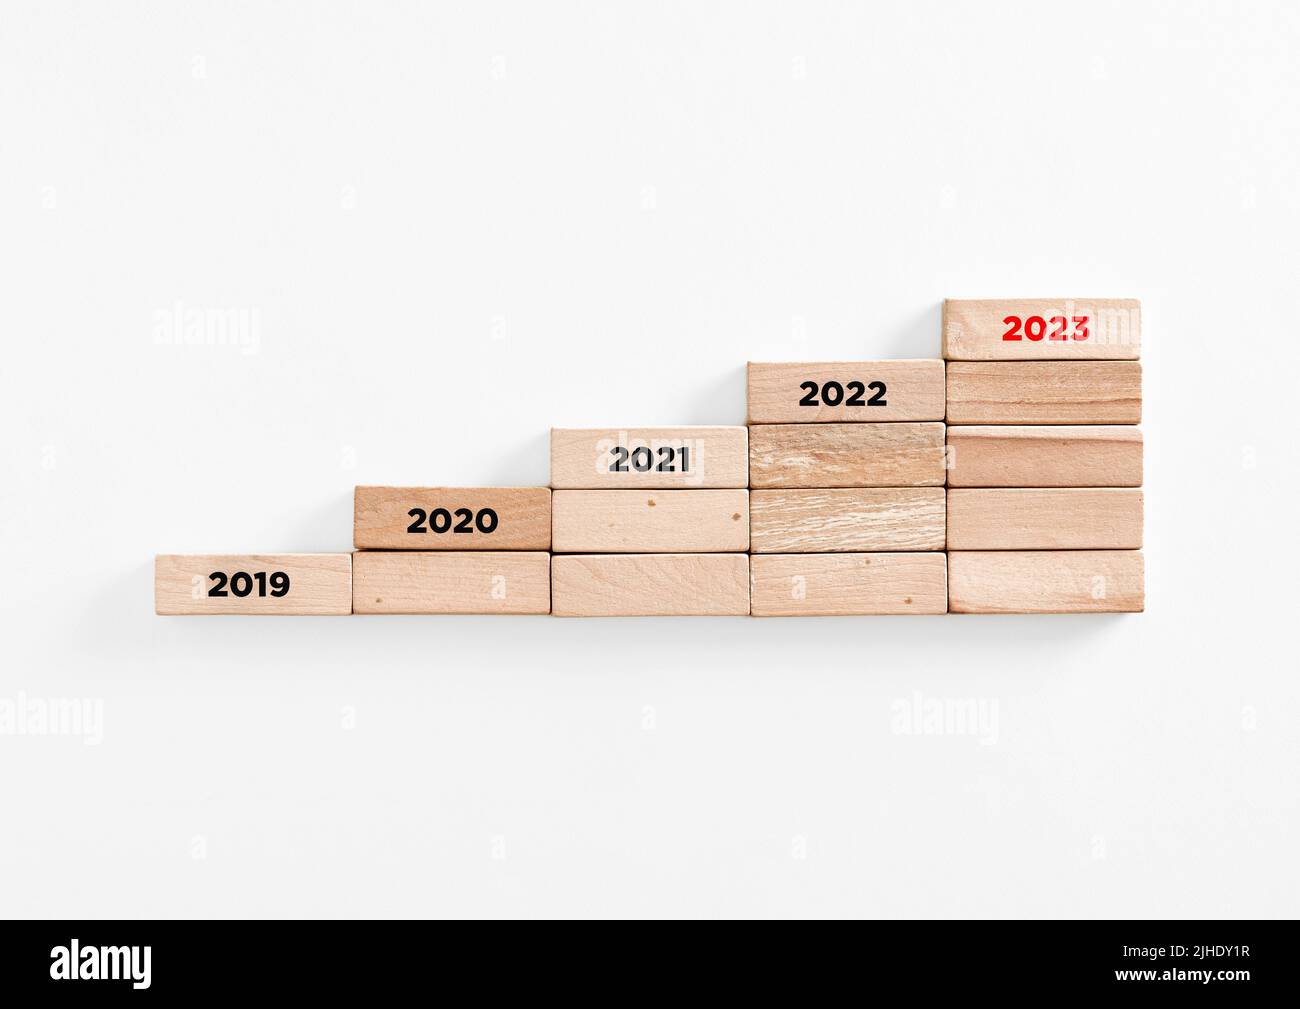 The year 2023 at the top of the ascending wooden ladder. Business timeline, growth and improvement over time concept. Stock Photo